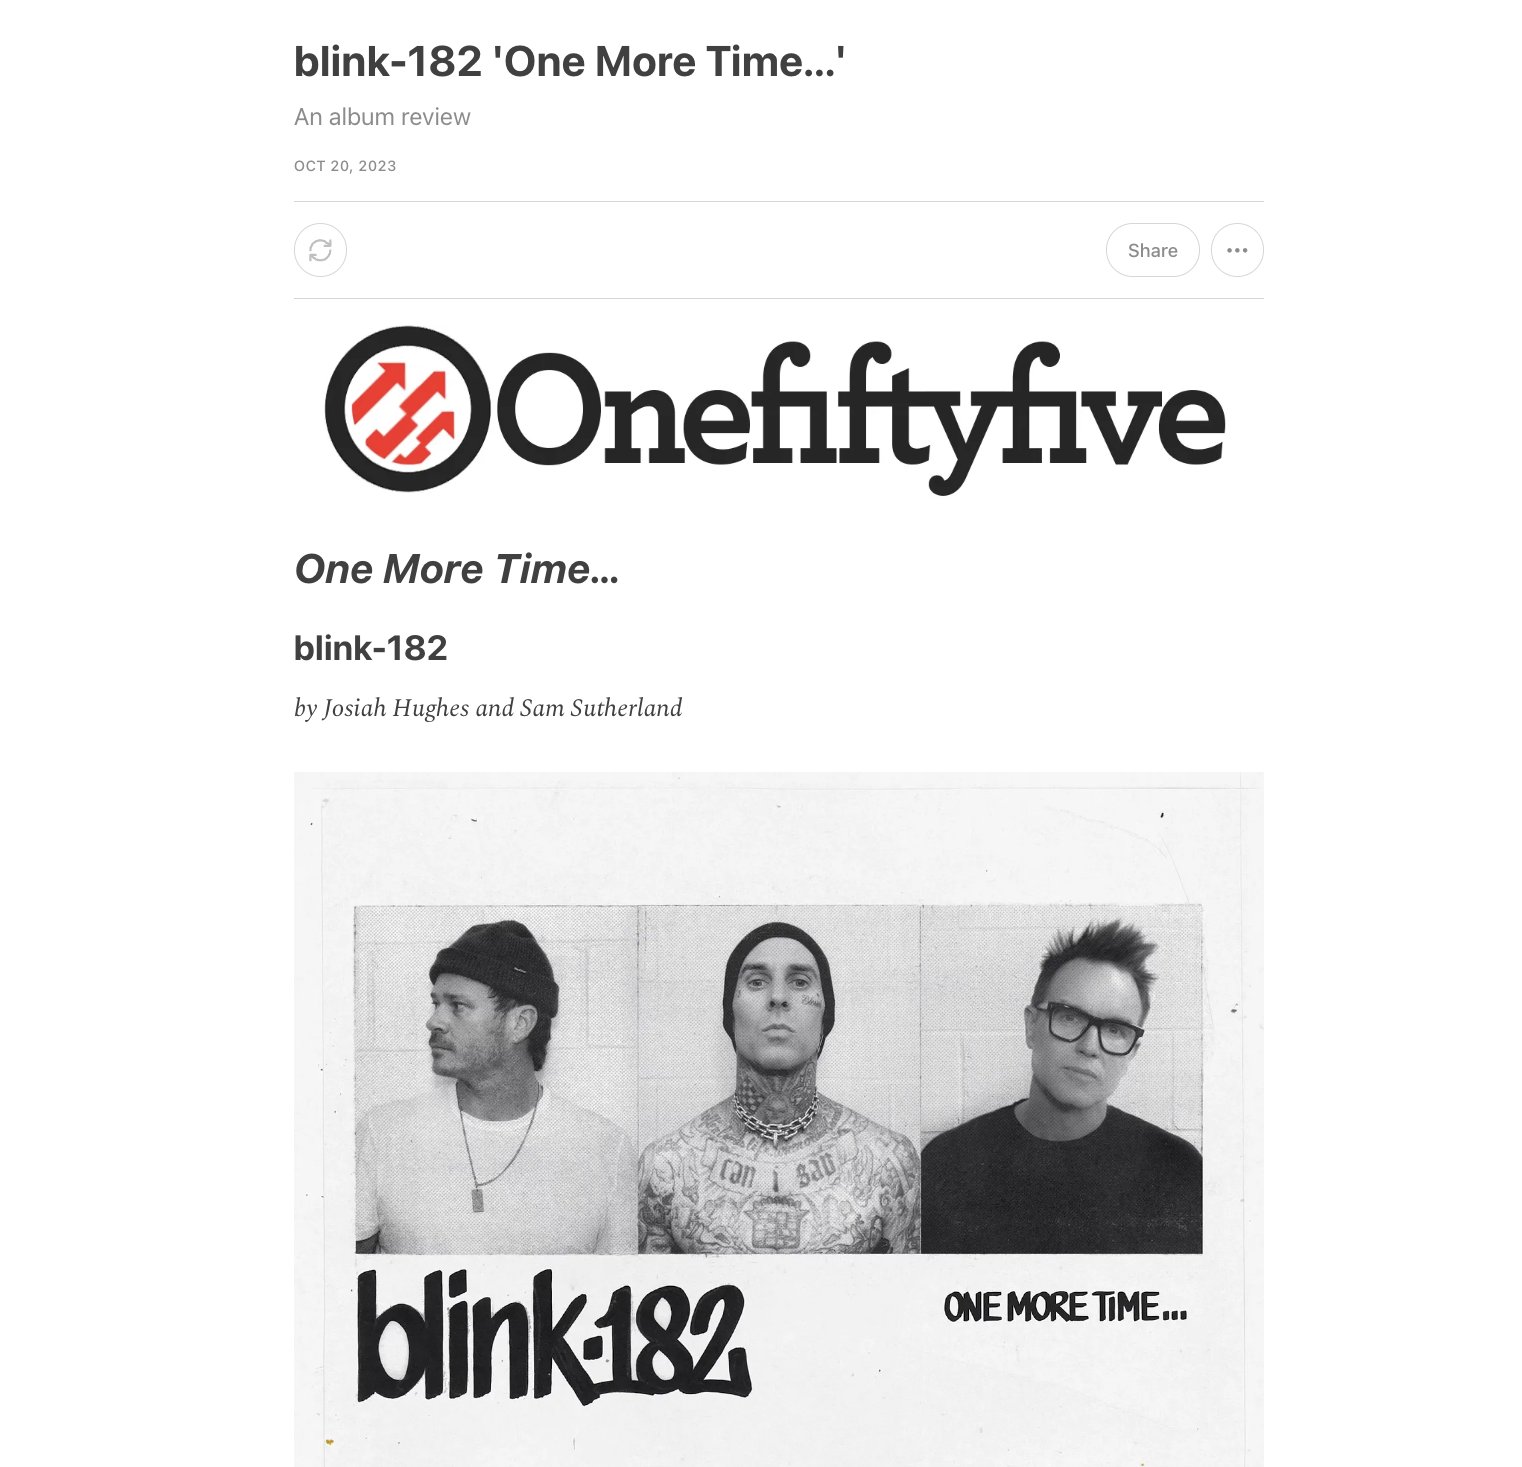 Blink-182: One More Time Album Review